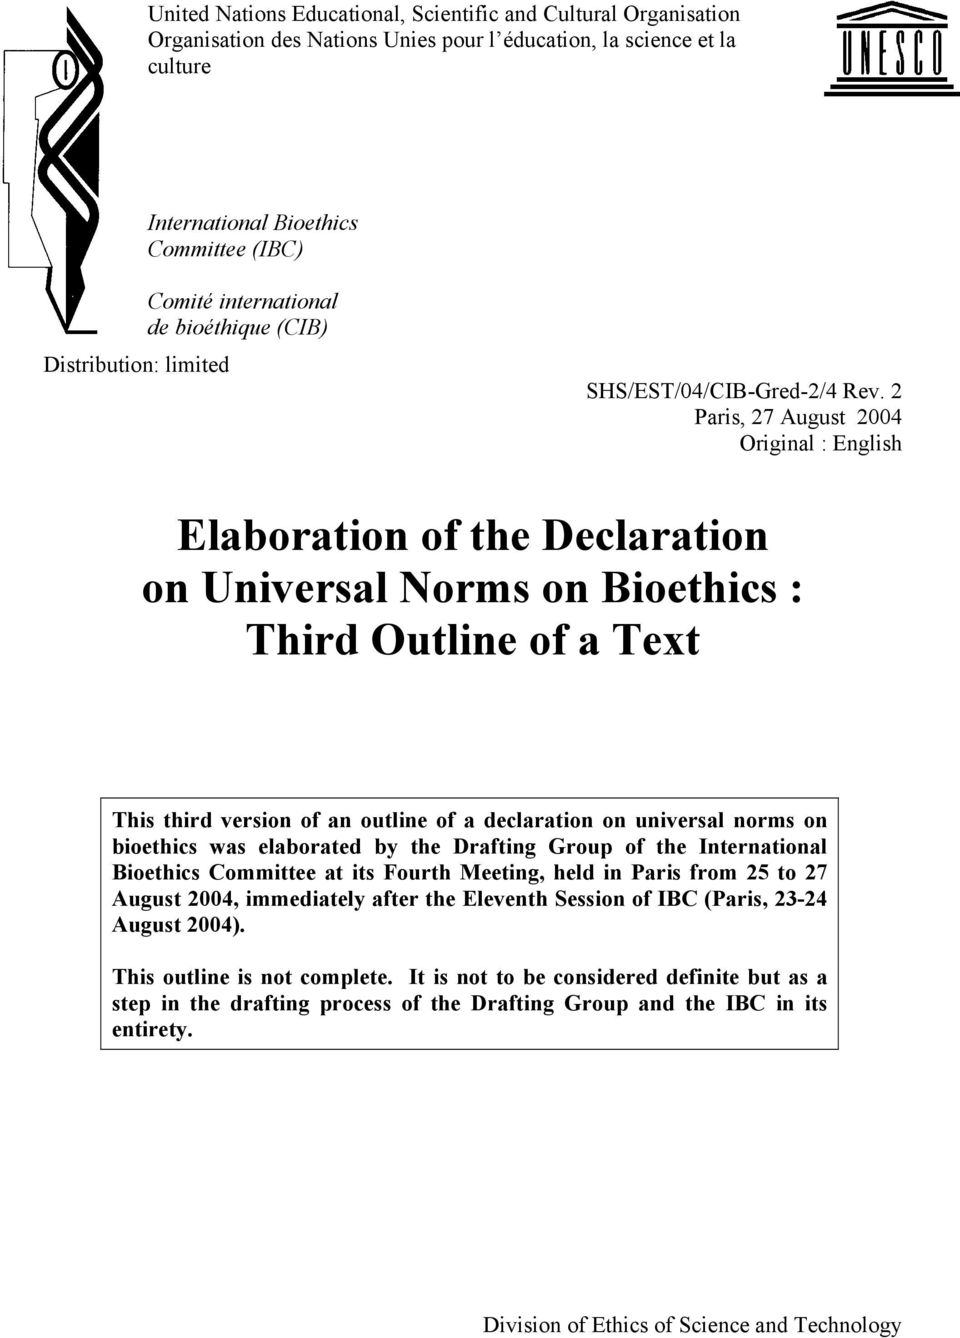 2 Paris, 27 August 2004 Original : English Elaboration of the Declaration on Universal Norms on Bioethics : Third Outline of a Text This third version of an outline of a declaration on universal